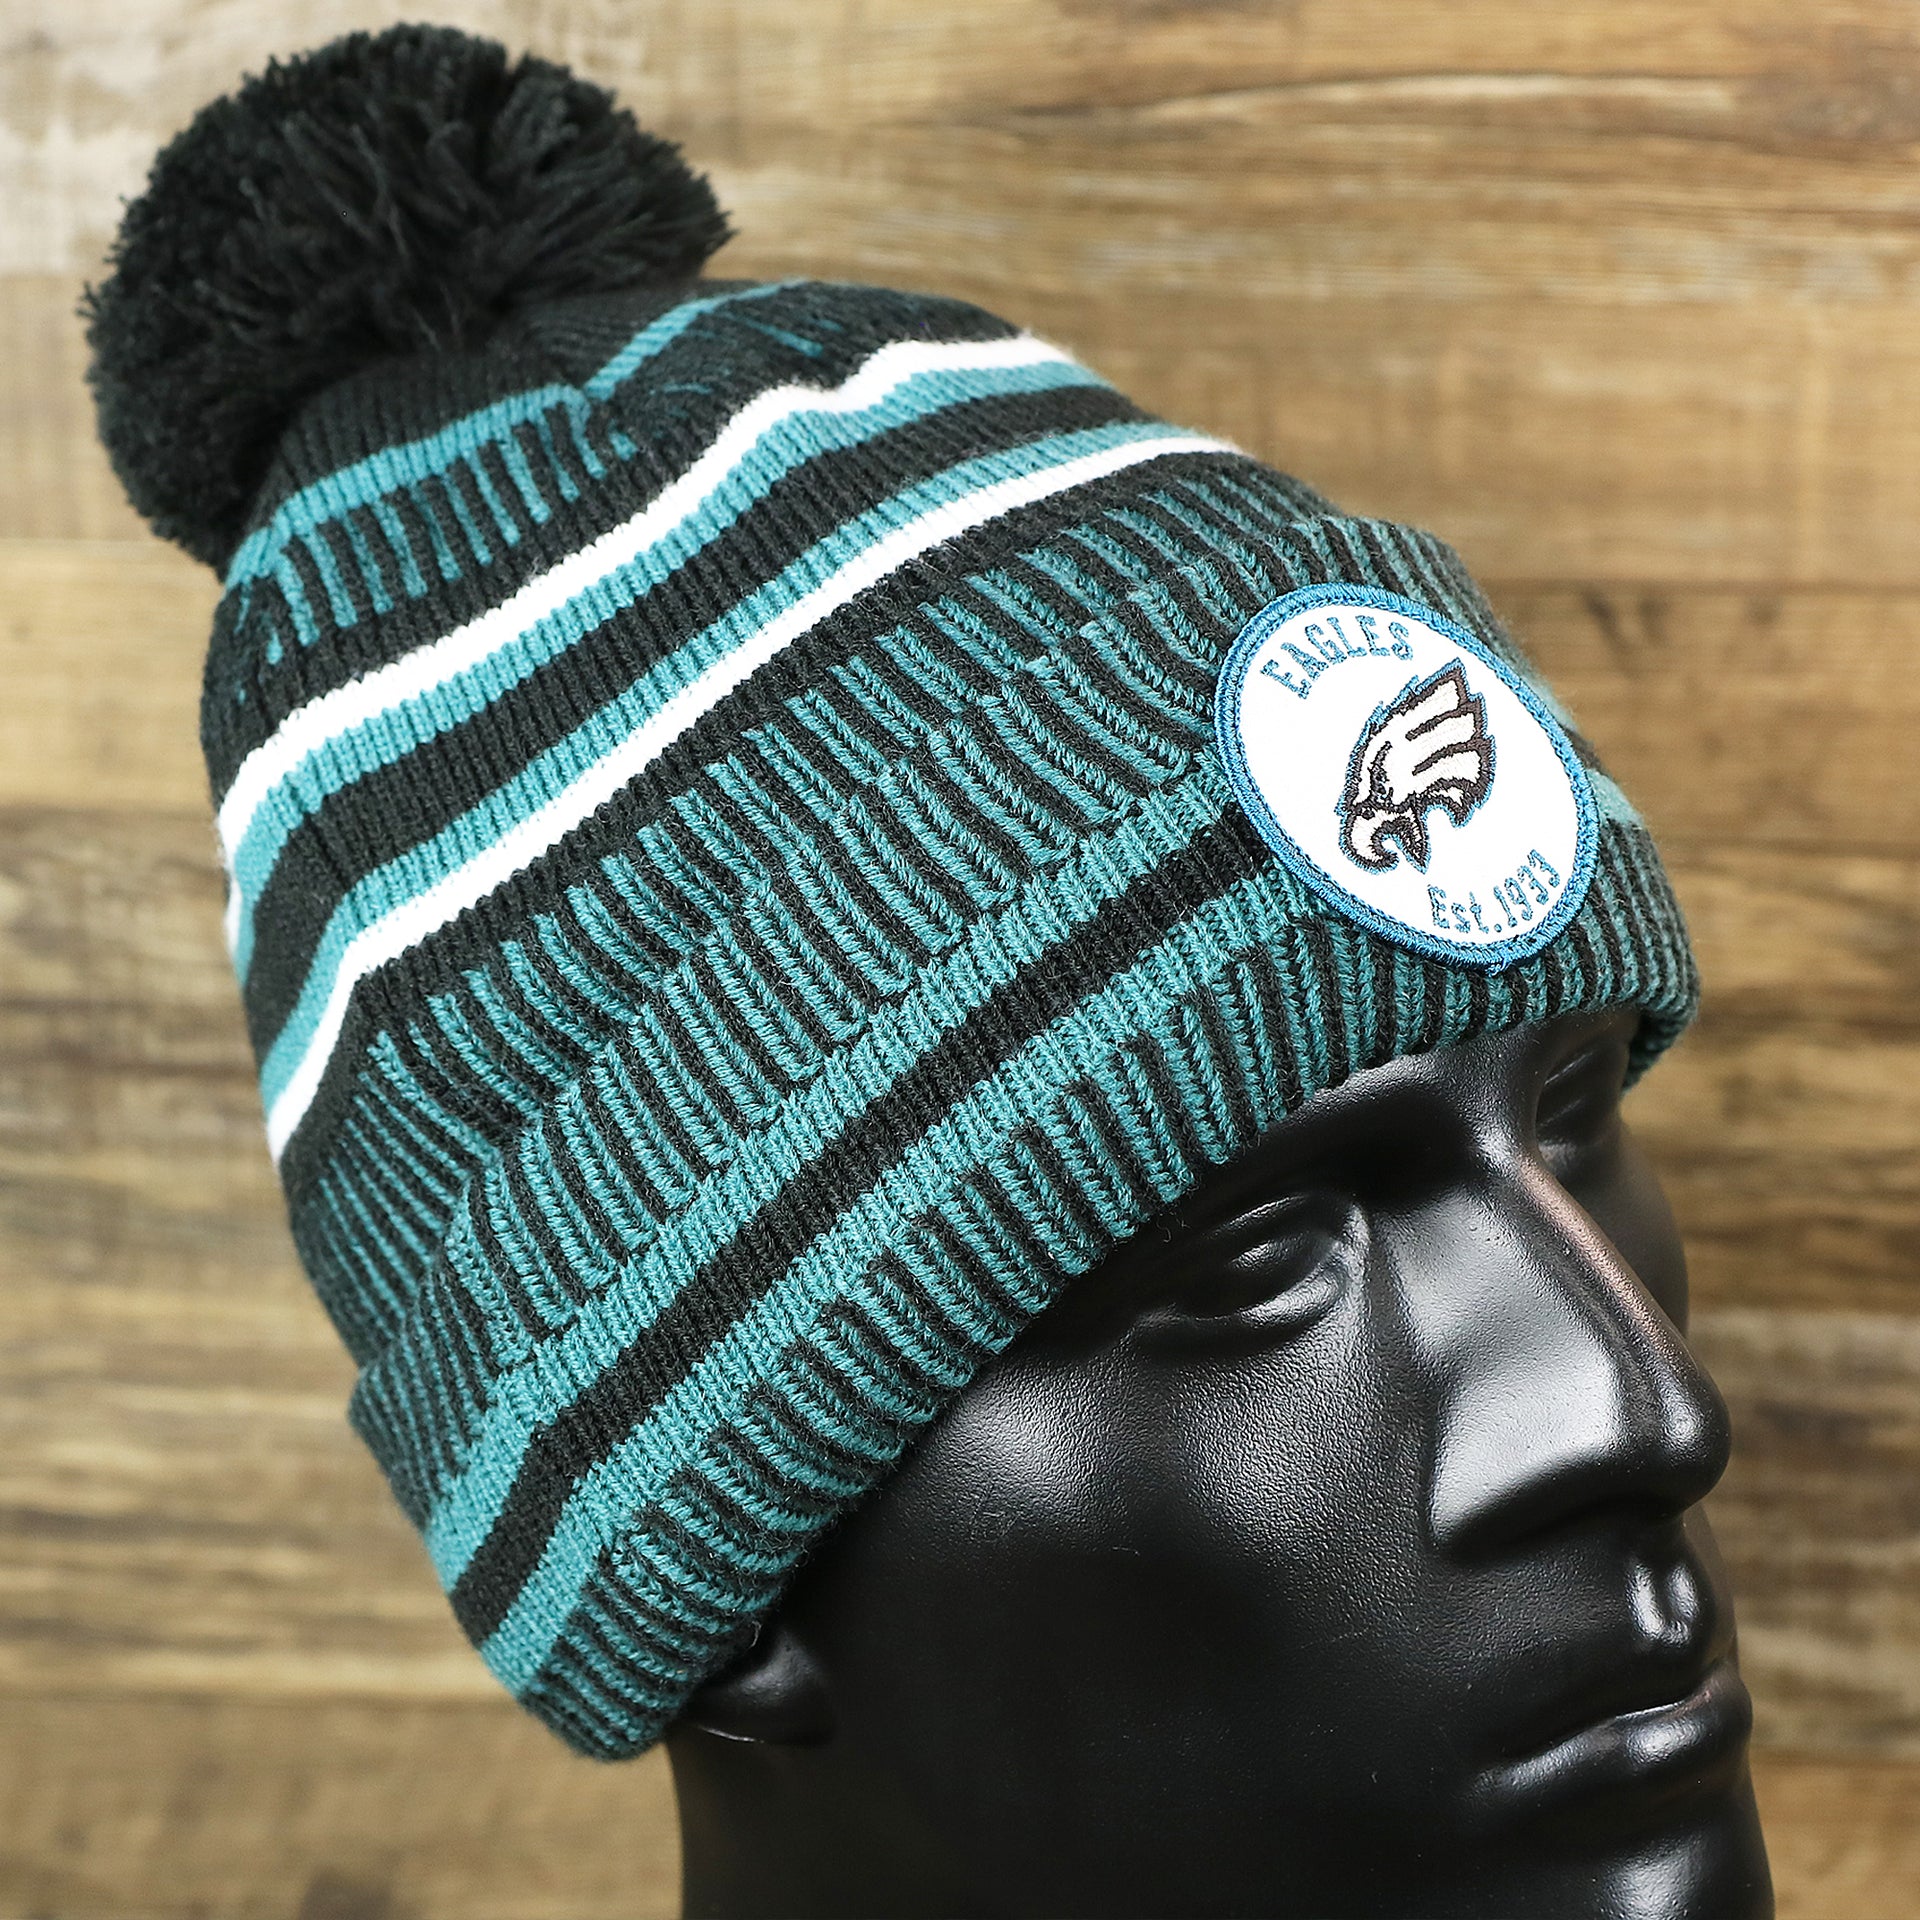 The Philadelphia Eagles Patch 1933 On Field Striped Eagles Colorway Pom Pom Winter Beanie | Black and Midnight Green Winter Beanie